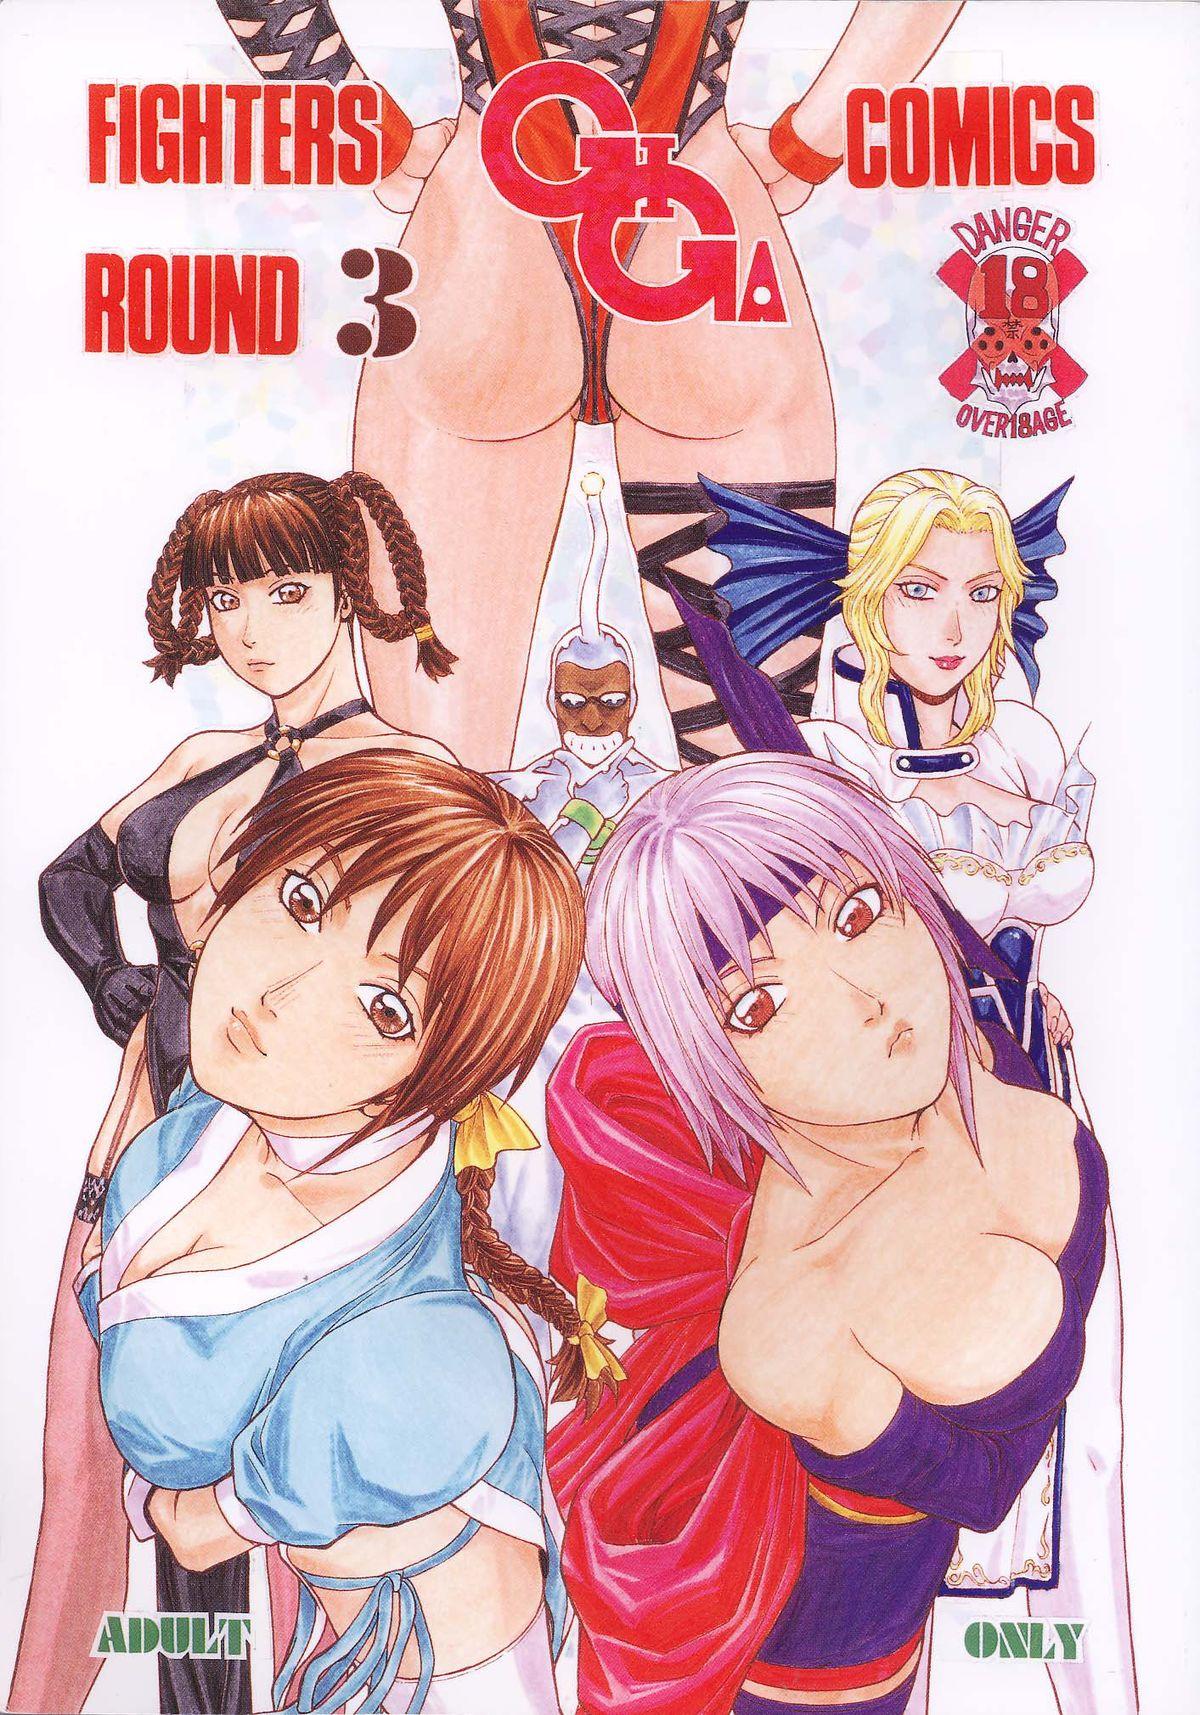 Job Fighters Giga Comics Round 3 - Street fighter Dead or alive Soulcalibur Smooth - Picture 1